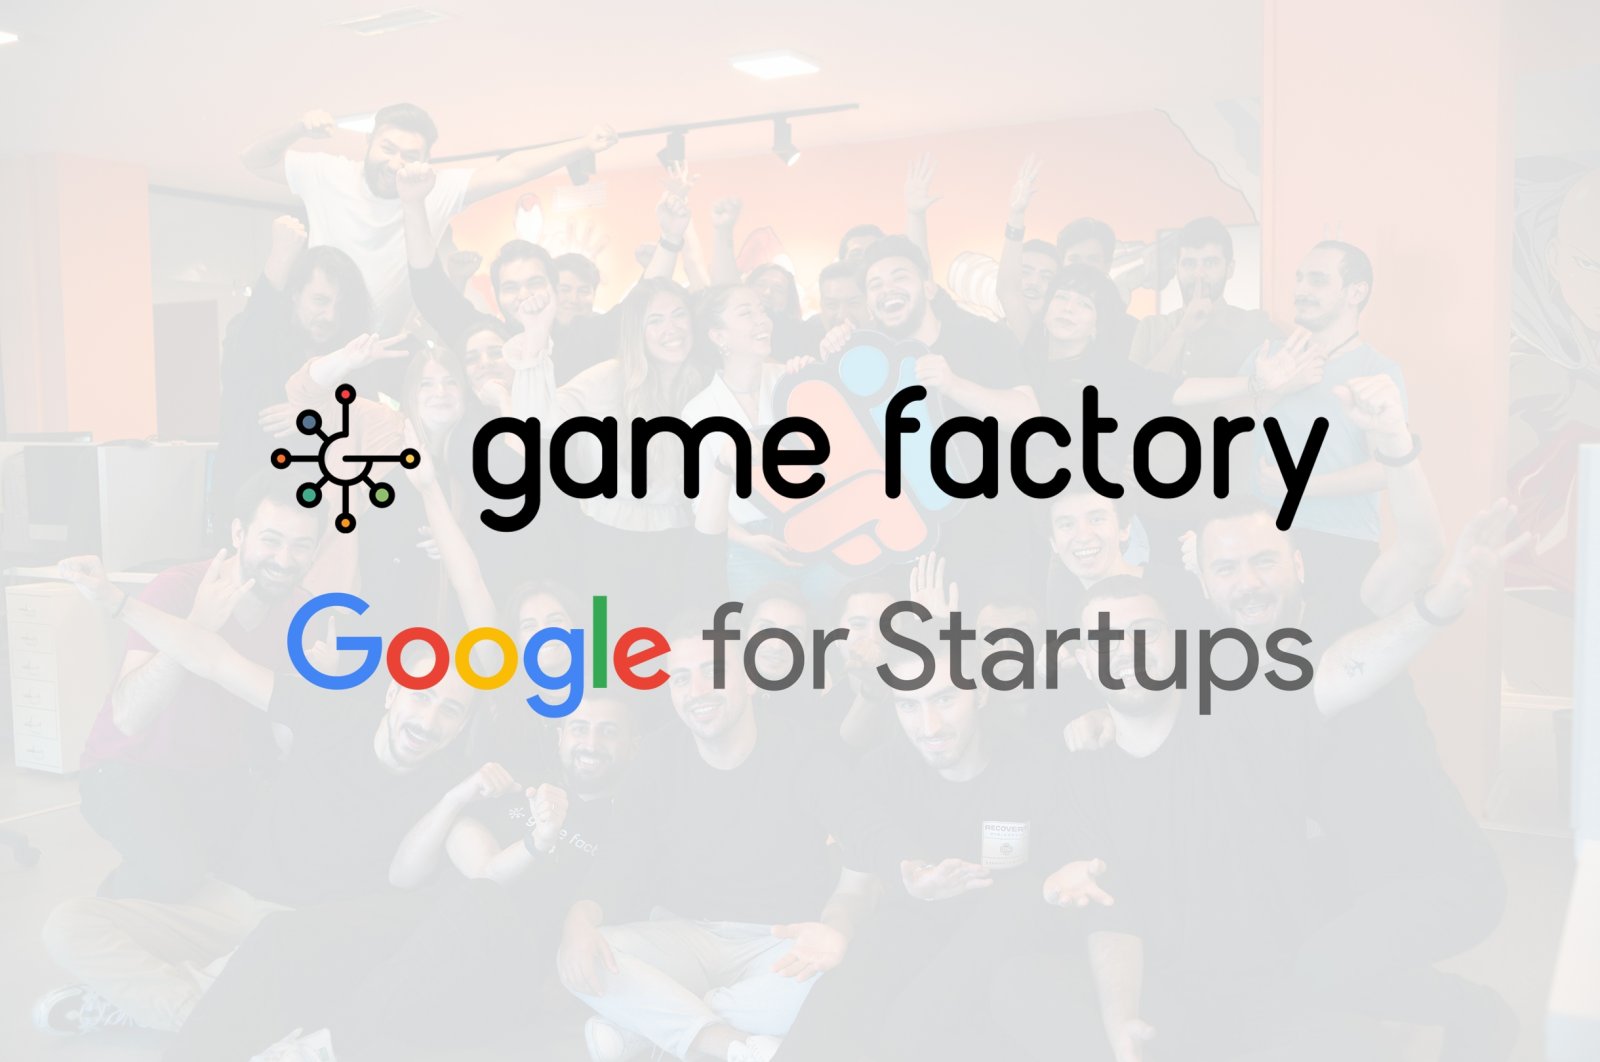 As part of the partnership with Google for Startups, Game Factory will introduce Turkish game developers to the global Google network. (Courtesy of Game Factory)